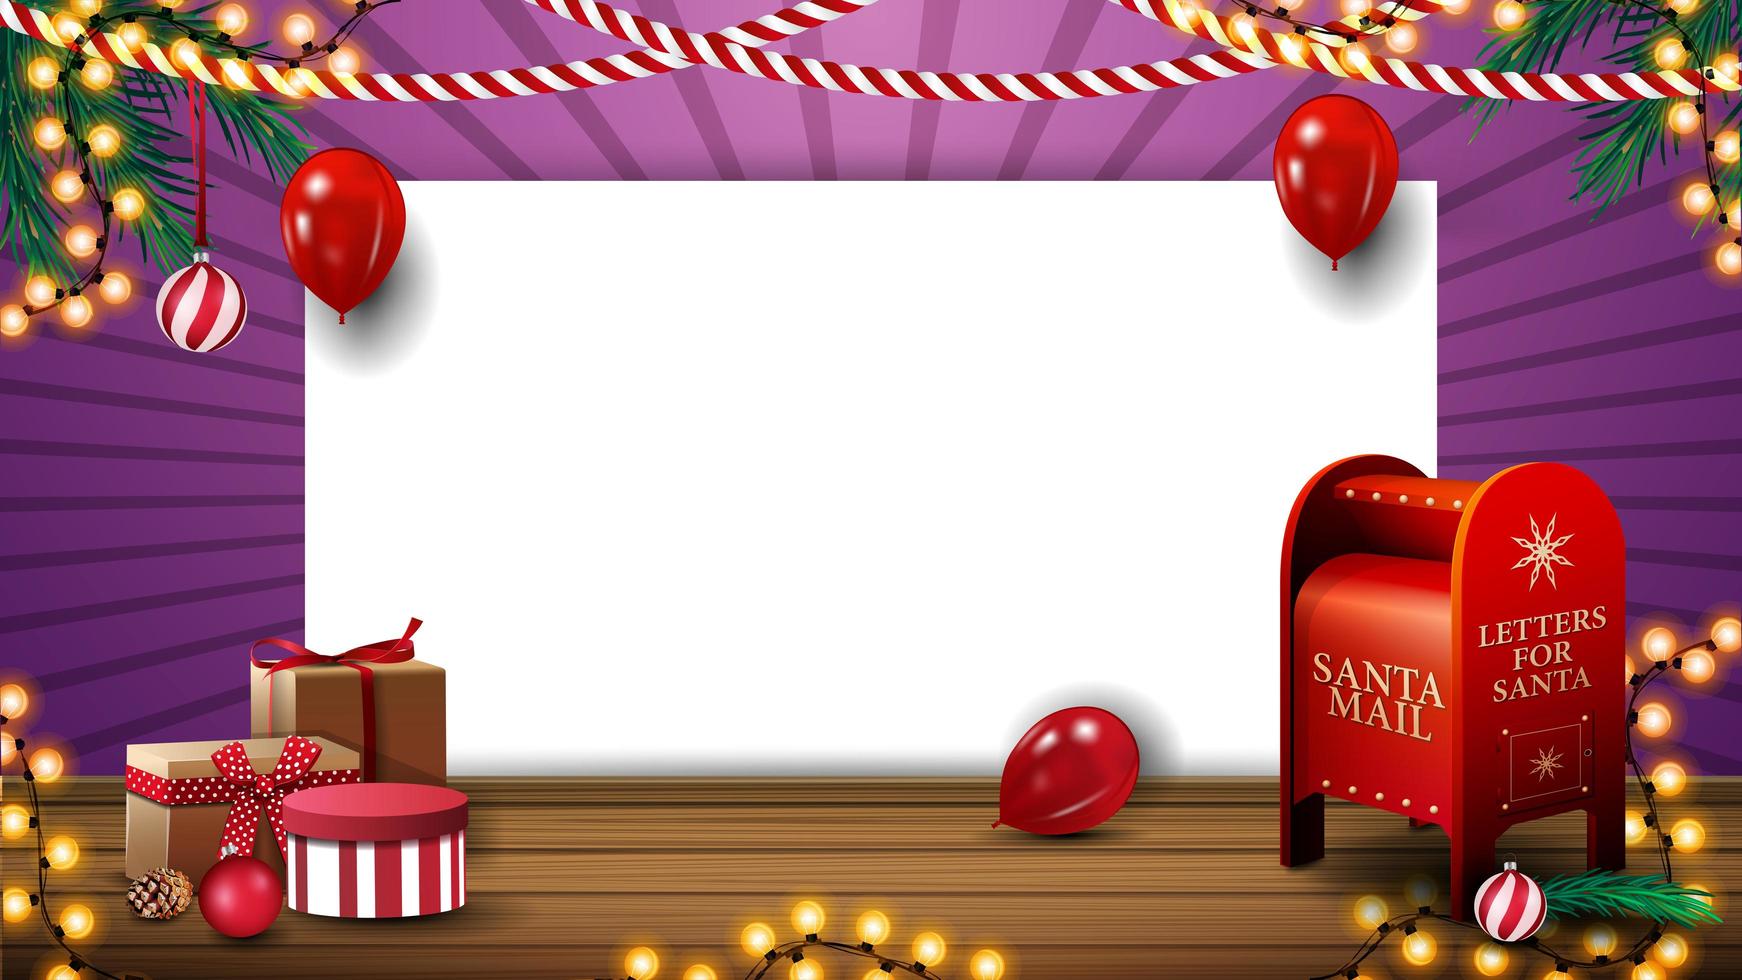 Christmas template for your creativity with white blank paper sheet, balloons, garlands, presents and Santa letterbox vector